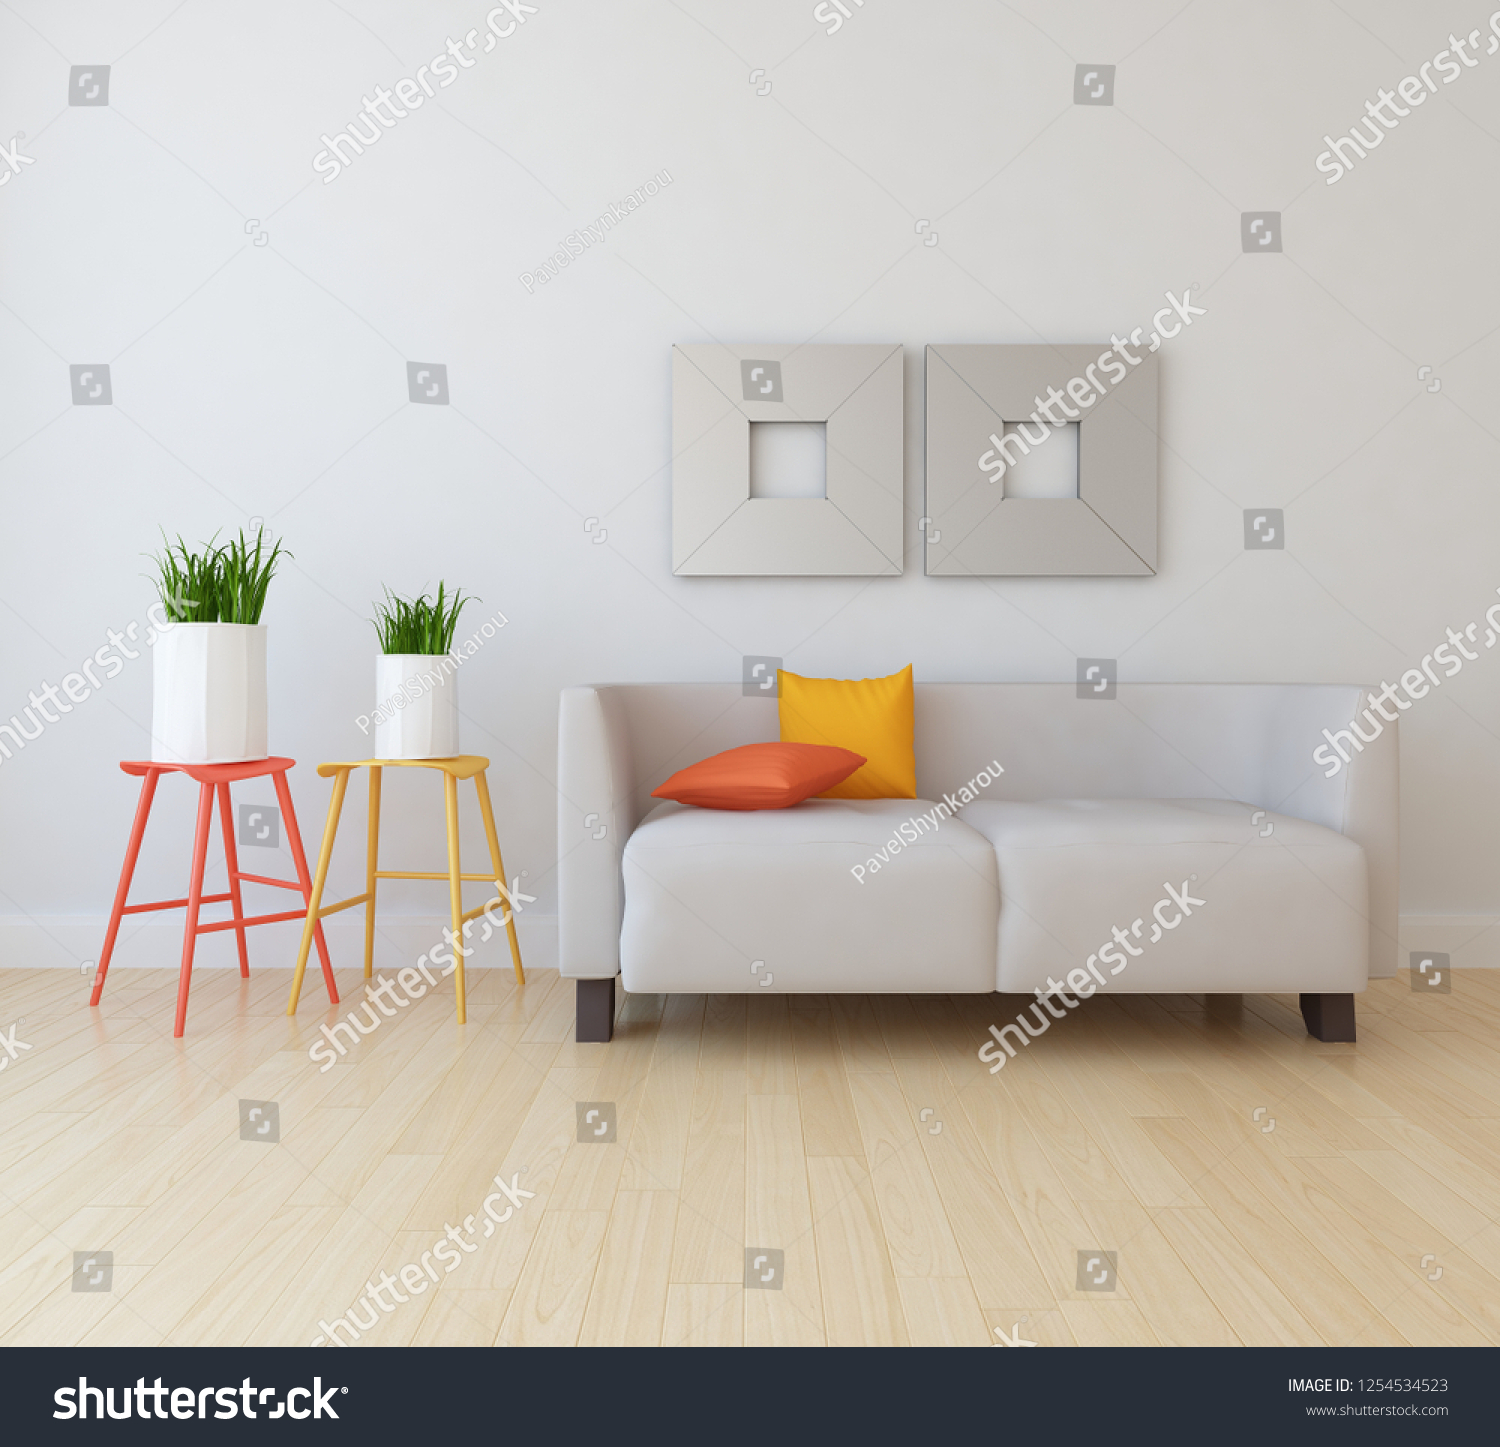 Idea of a white scandinavian living room interior with sofa, vases on the wooden floor and frames on the large wall and white landscape in window. Home nordic interior. 3D illustration #1254534523